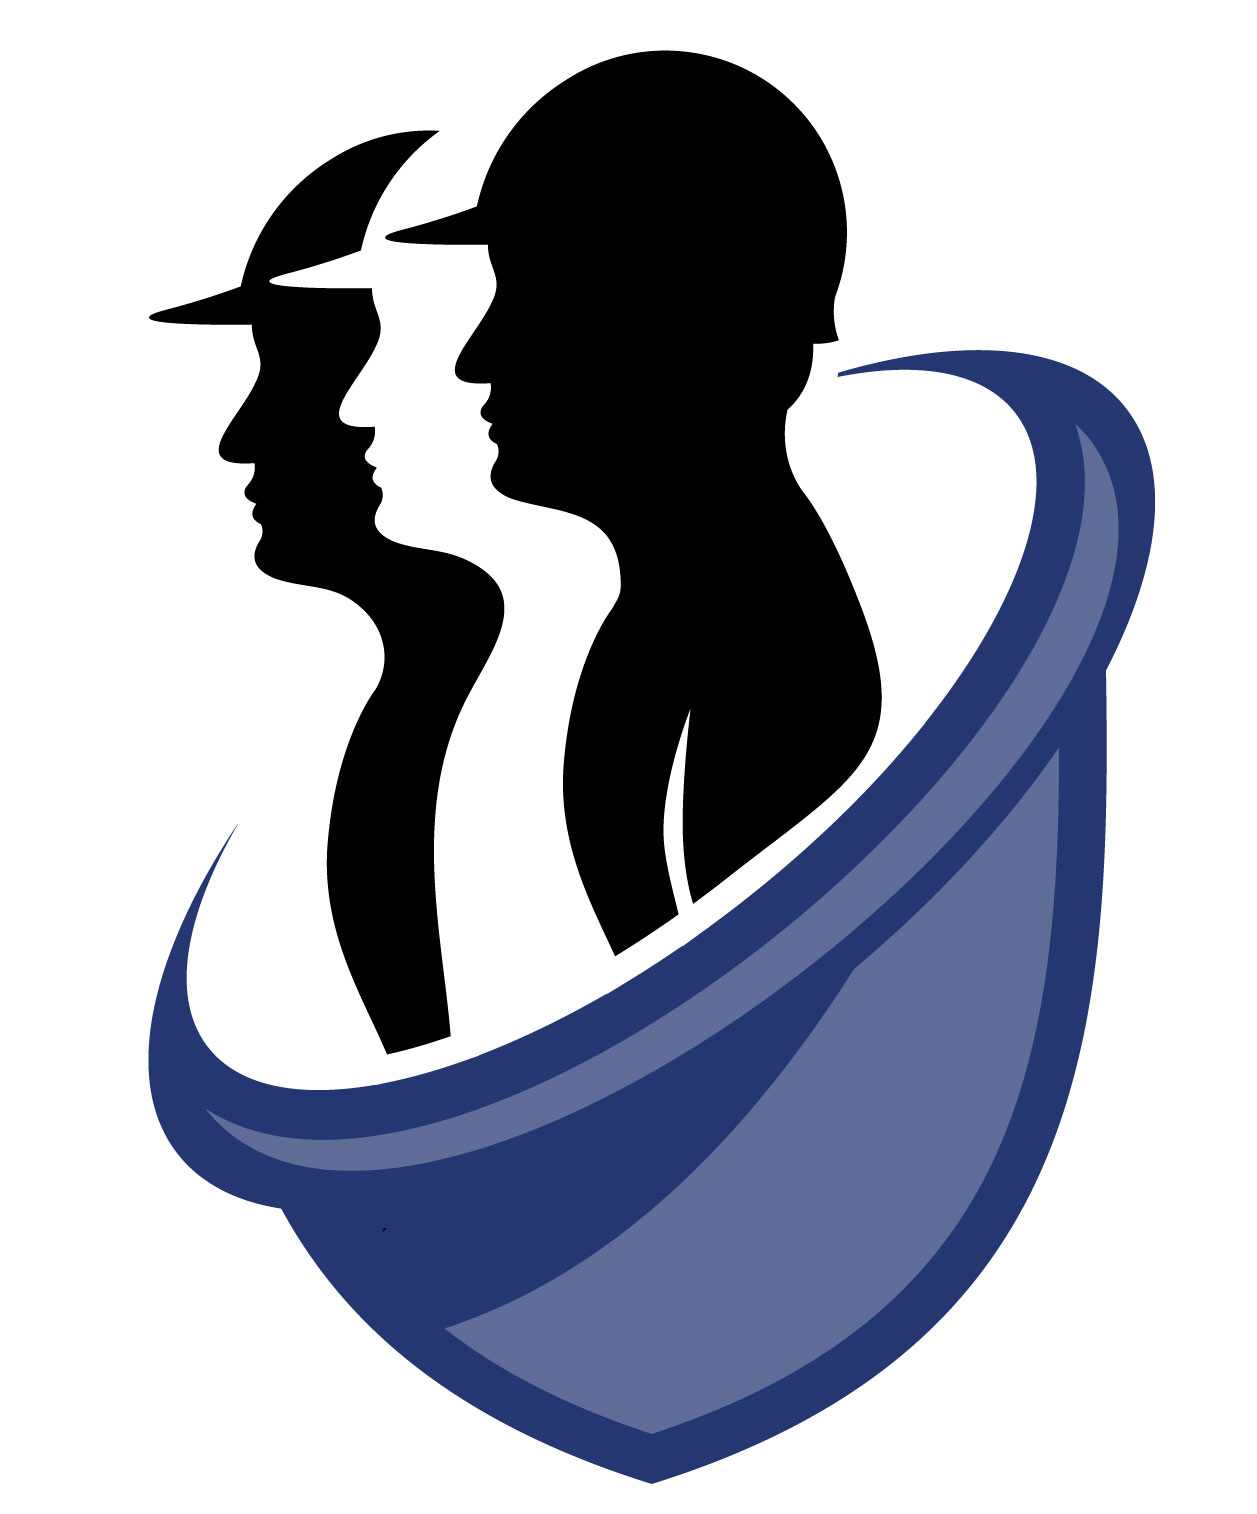 Icon of a hard hat with a silhouette of three safety workers inside